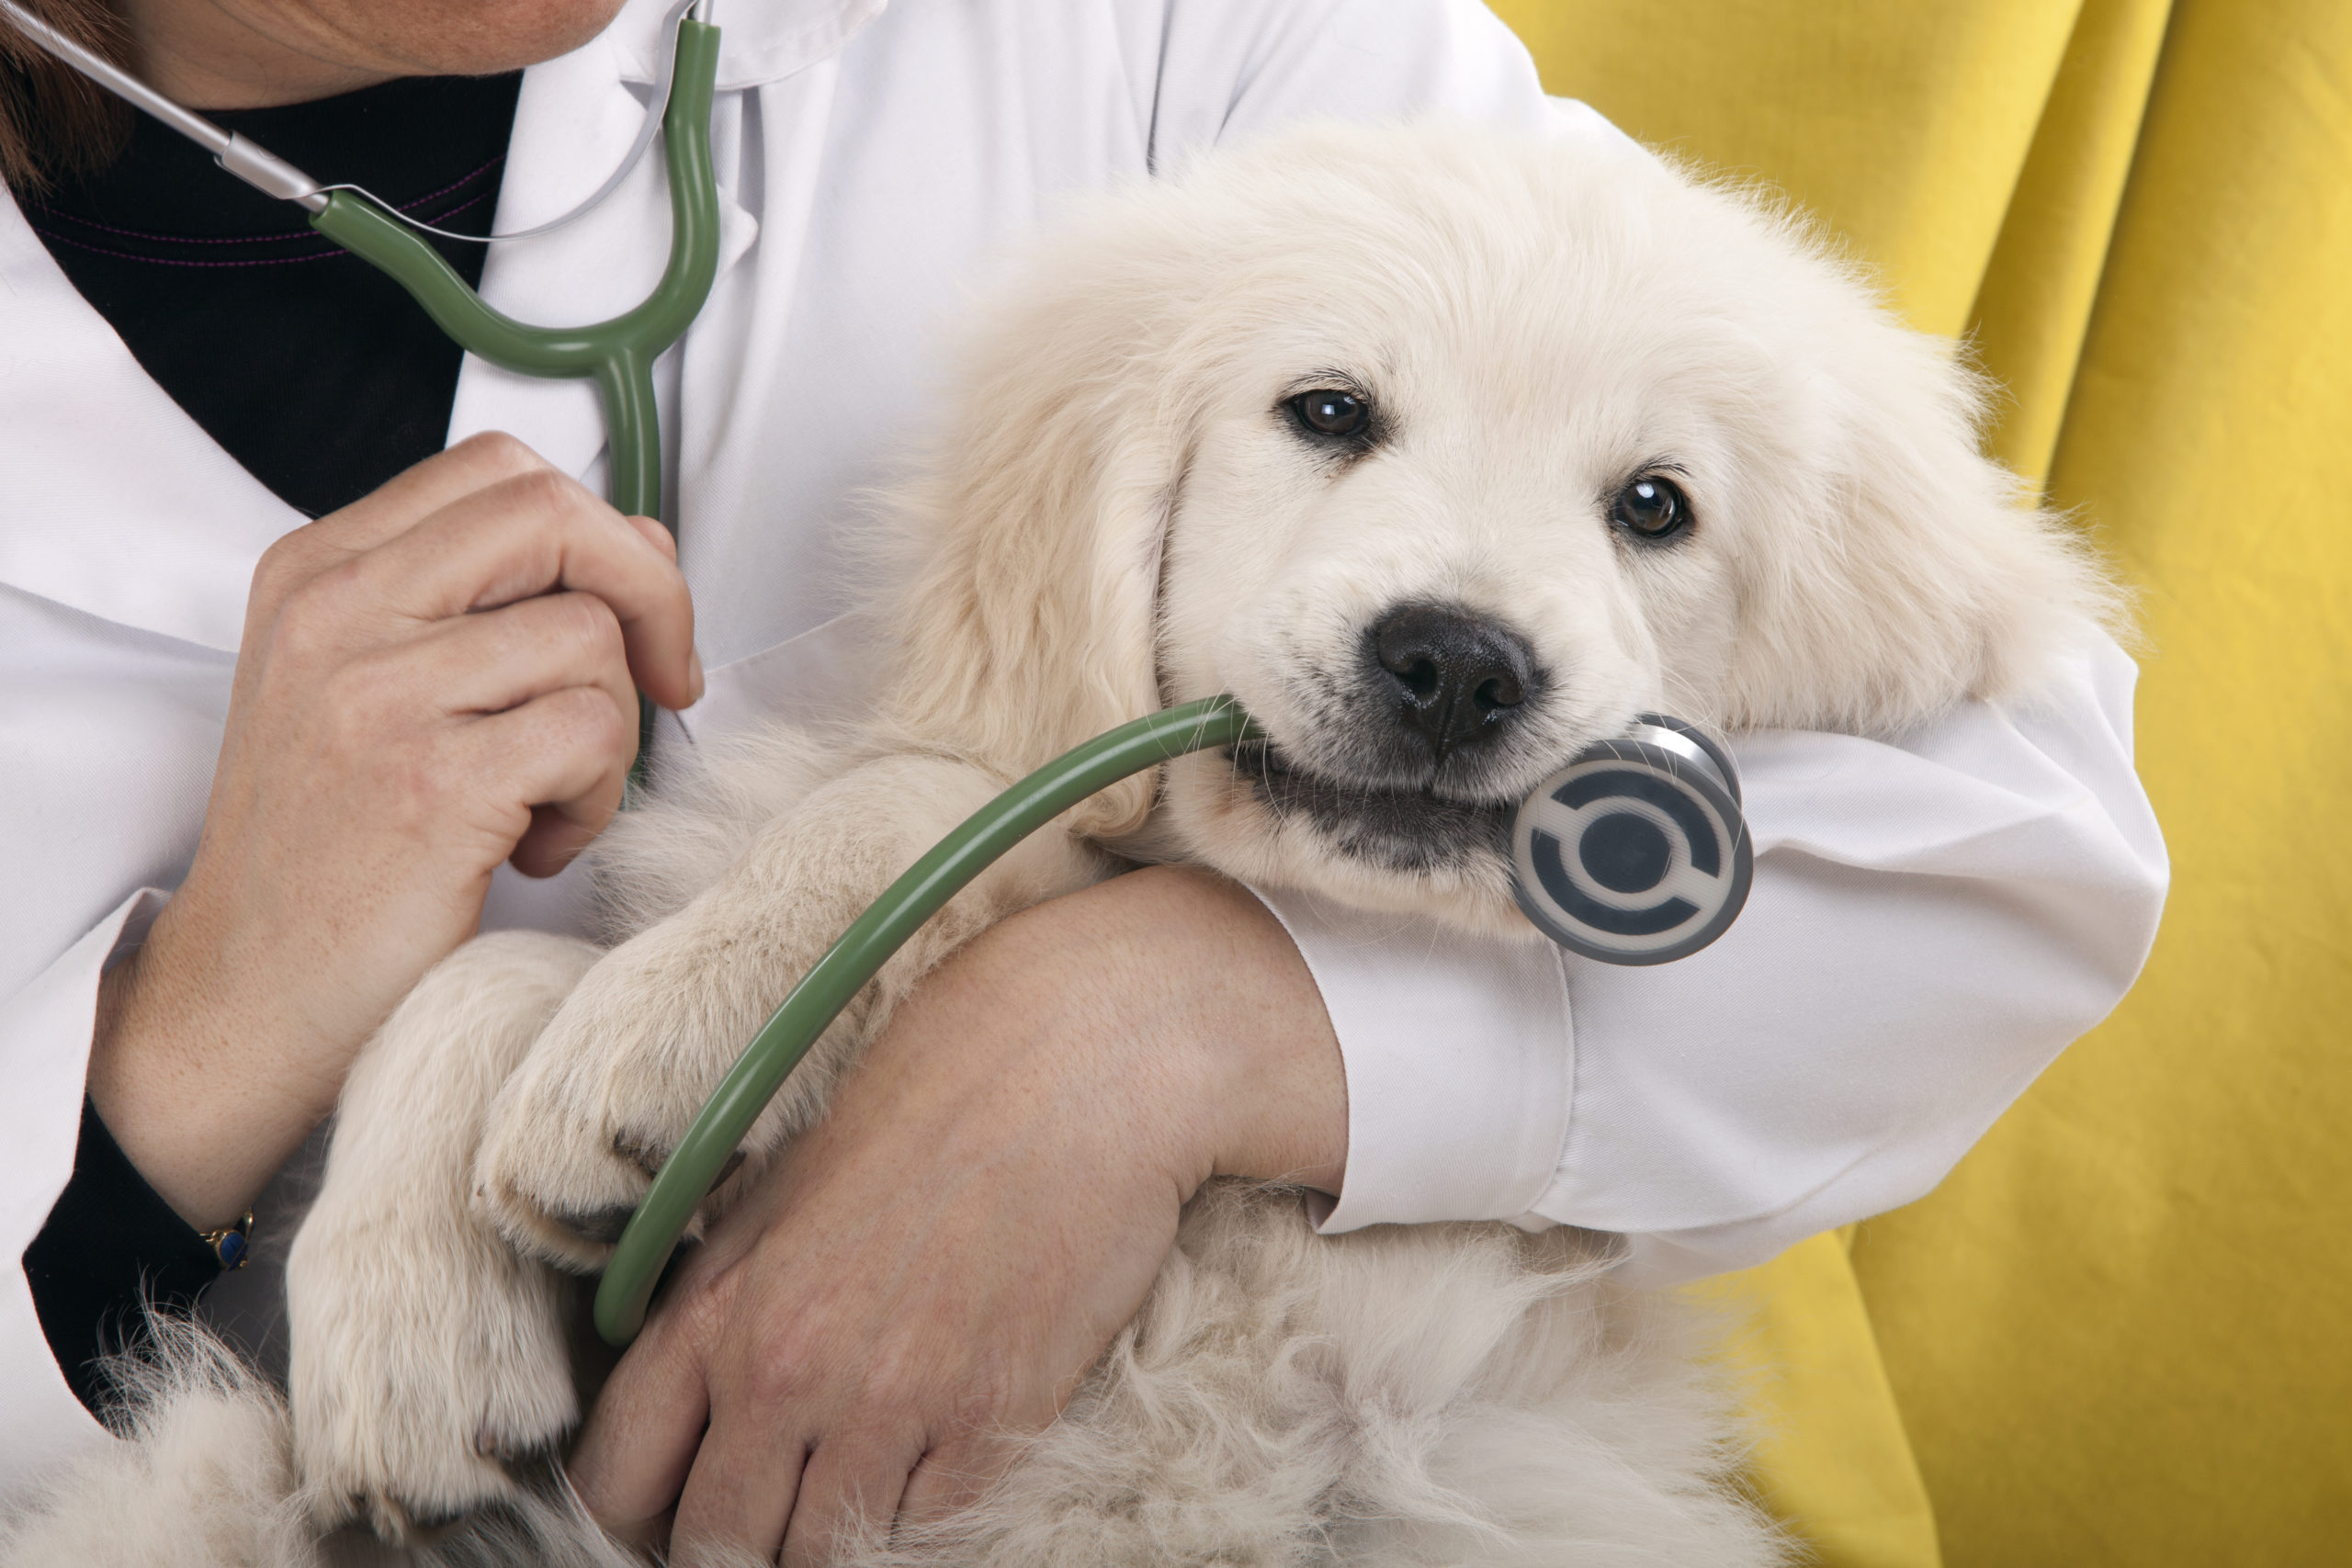 a dog nibbling a stethoscope